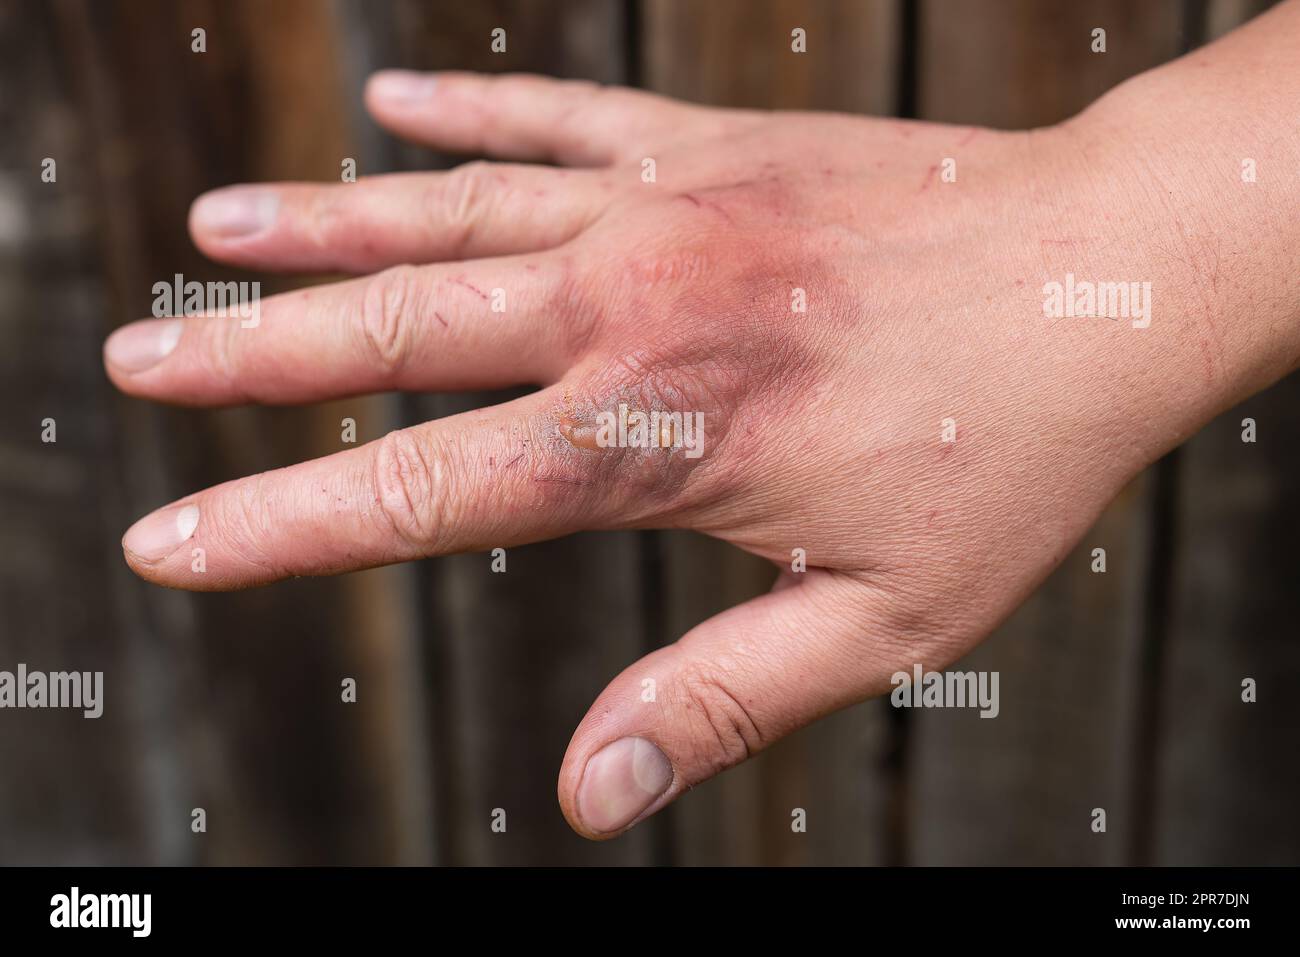 First degree skin burn. Hand burns, wounds. Hot boiling water acts on the skin. Fresh burn. Stock Photo